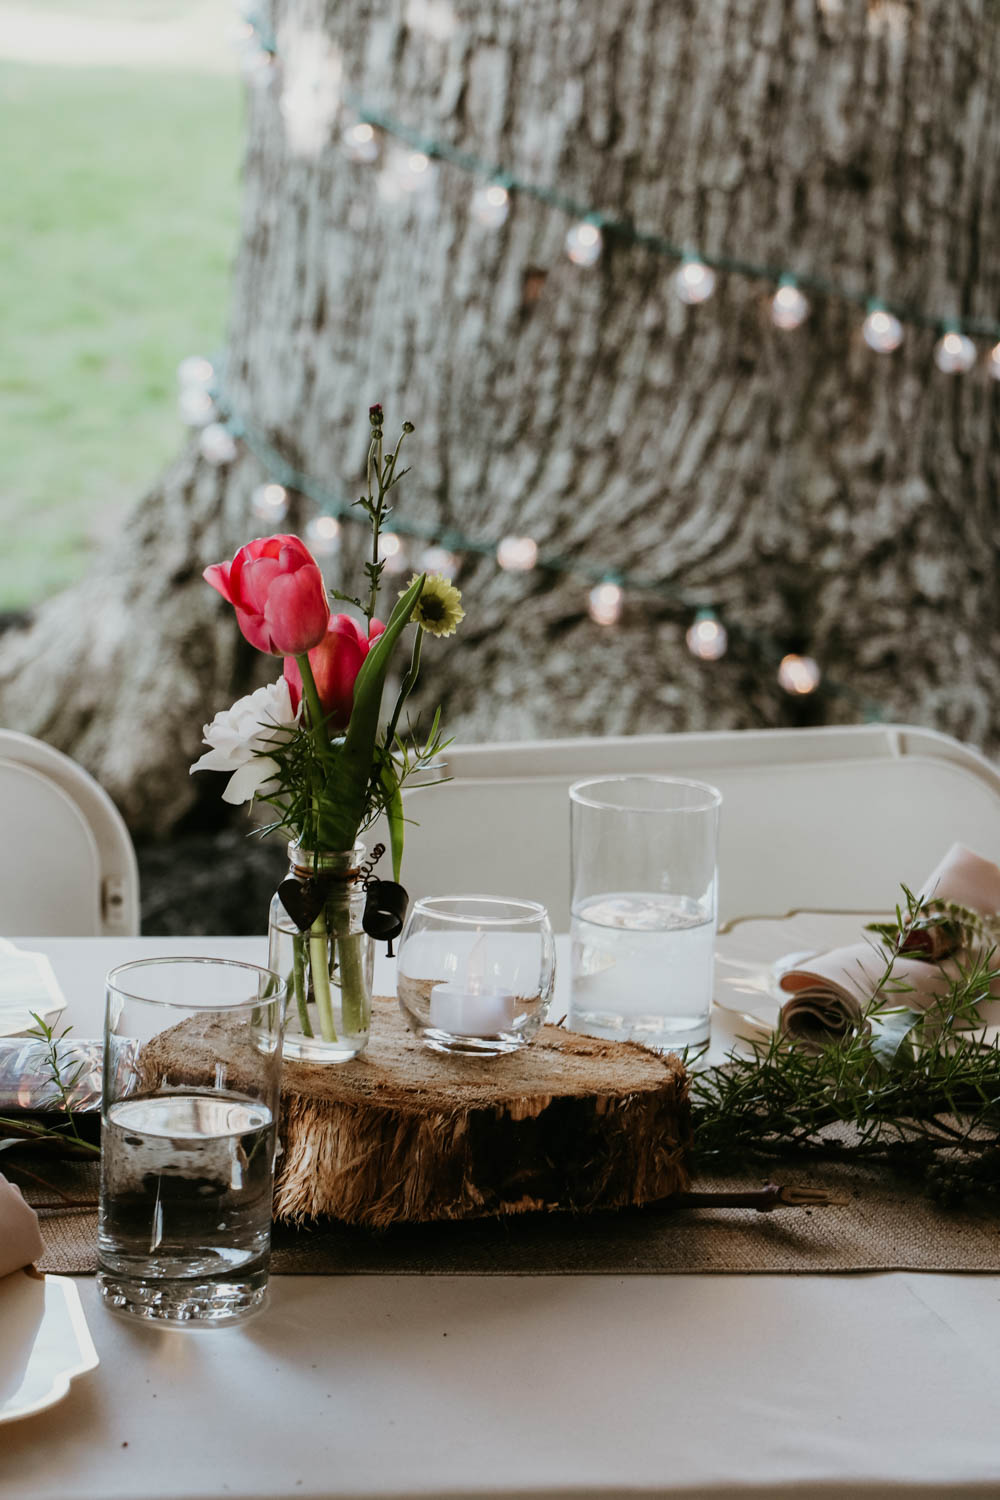 Backyard Rehearsal Dinner Party Rehearsal Dinner Ideas and Decorations Rehearsal Ideas Rehearsal Dinner Centerpiece Garden Tablescape White Table with Greenery1